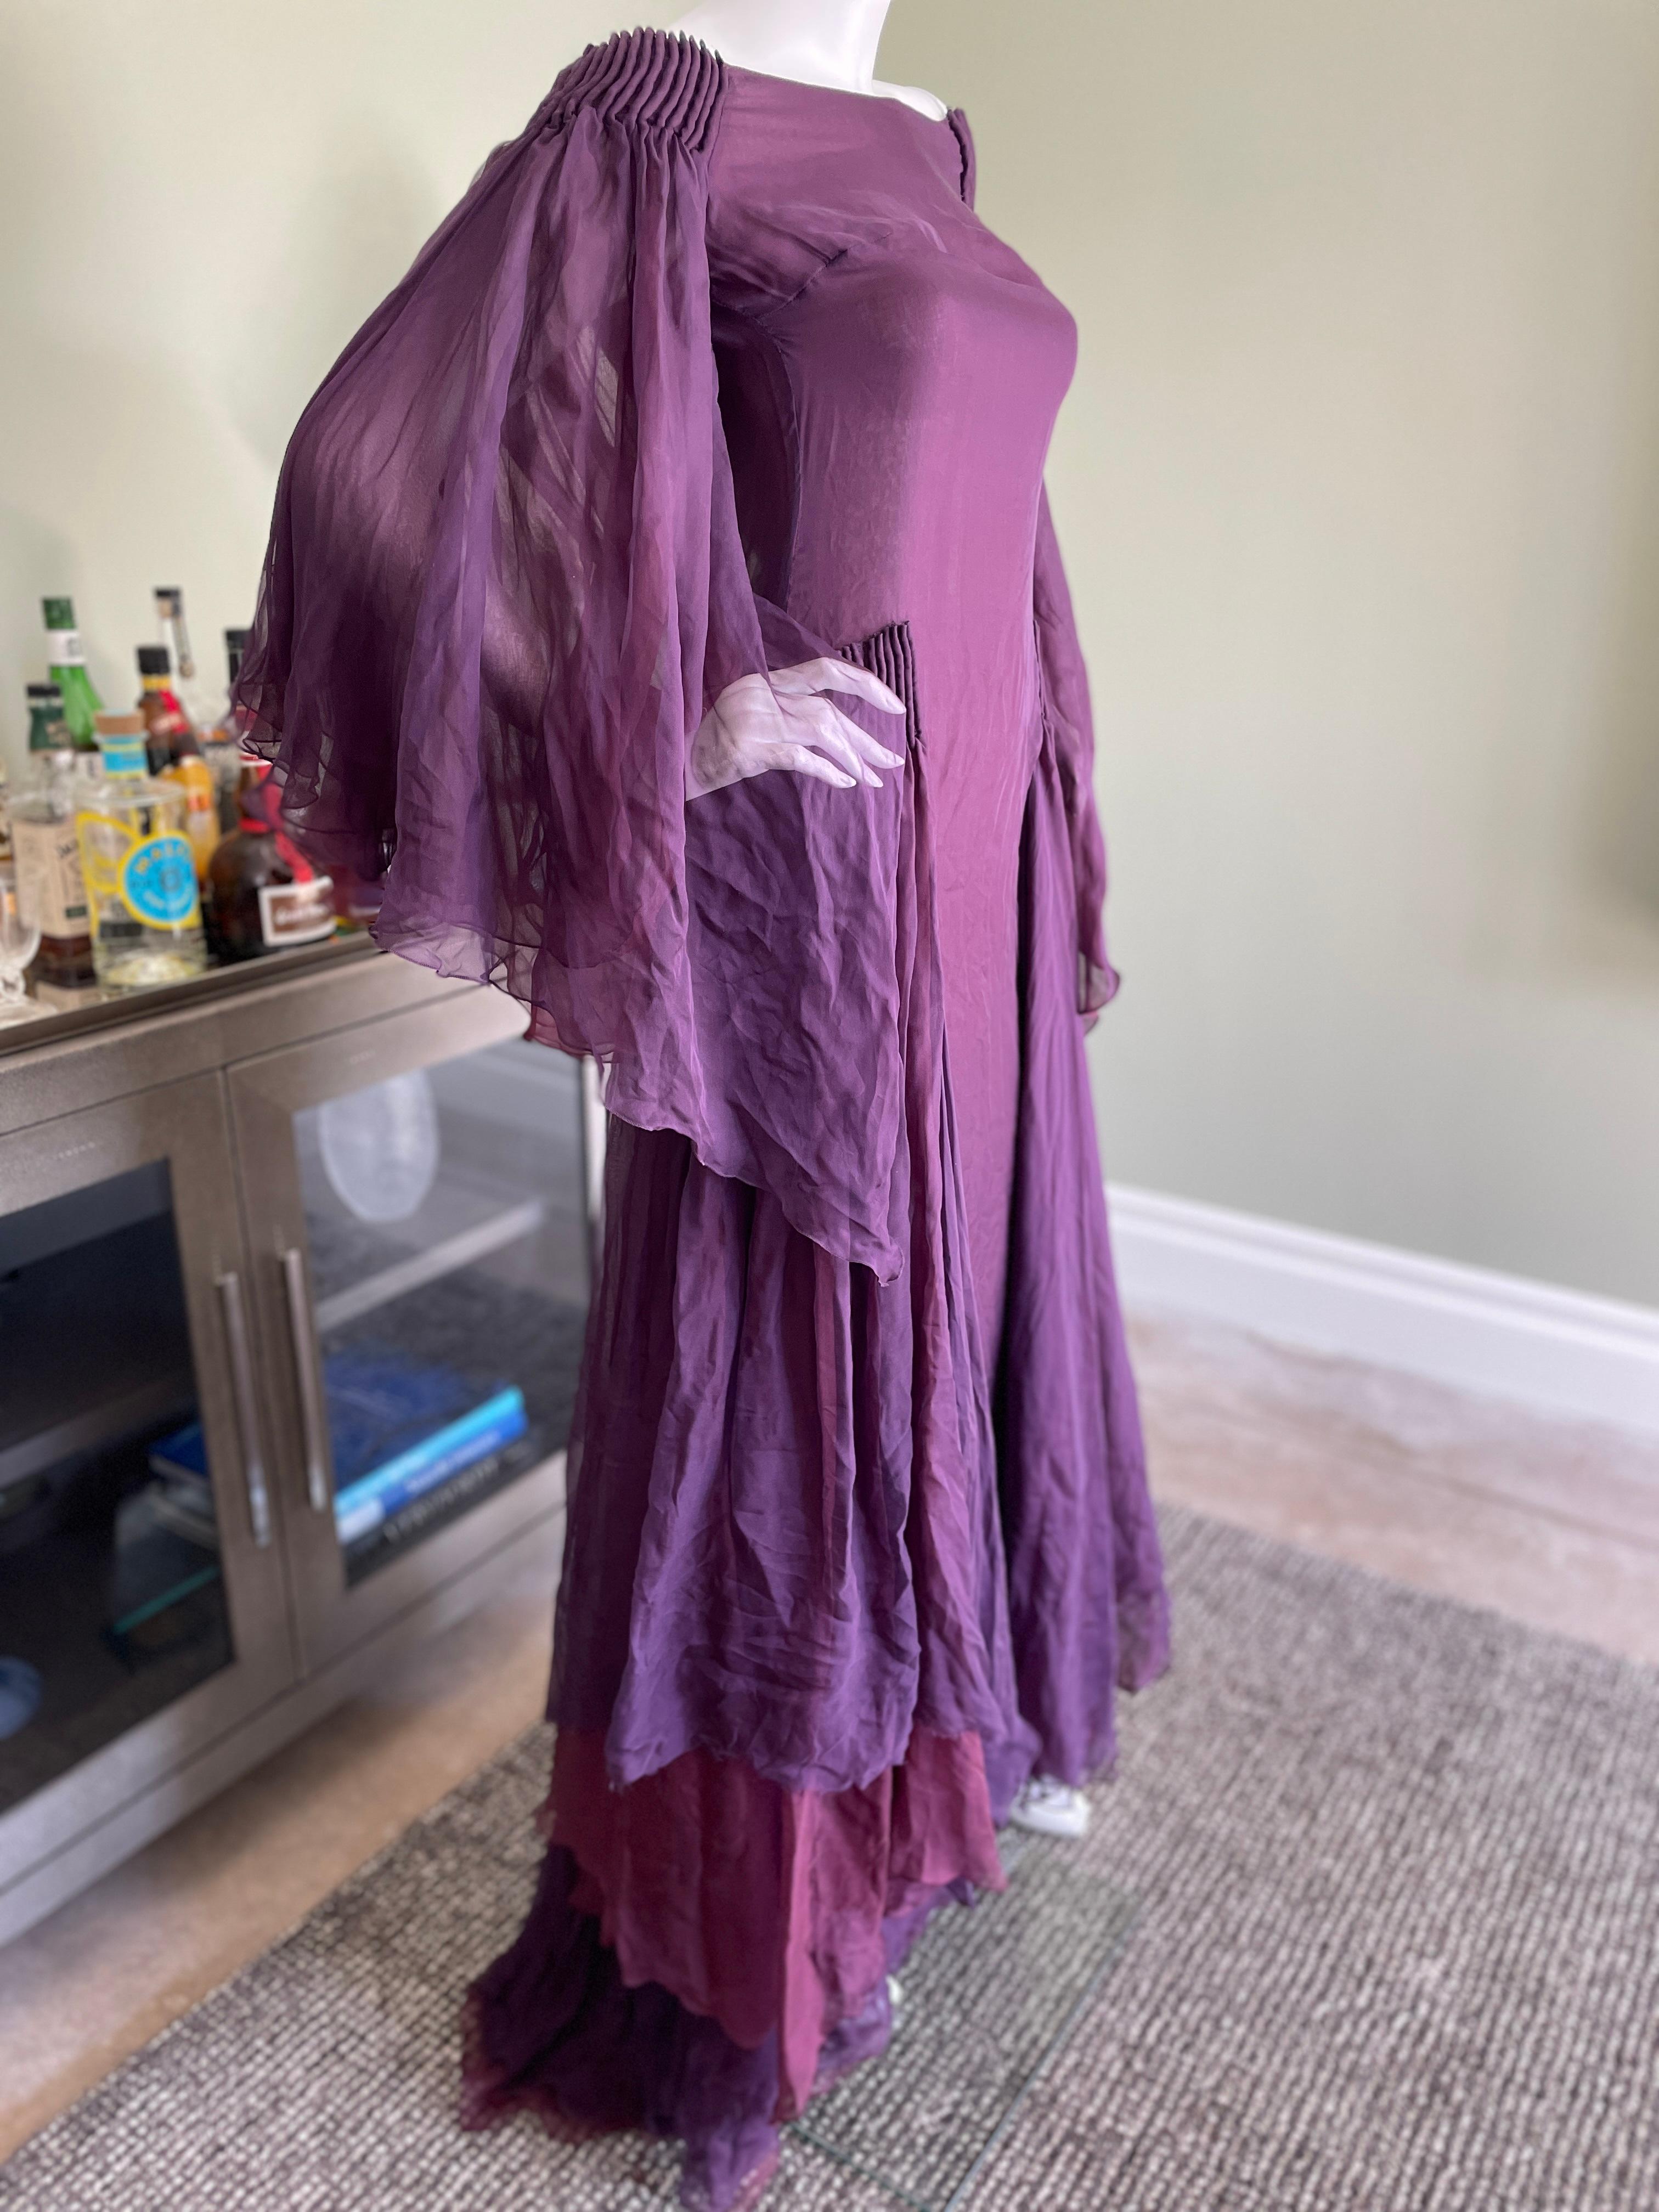 Valentino Vintage Purple Silk Chiffon Ethereal Evening Dress.
This is so beautiful, with romantic flutter sleeves and flowing panels at the hips.
It's too small for my mannequin, the zipper works, I didn't want to force it. 
 This is vintage 1990's